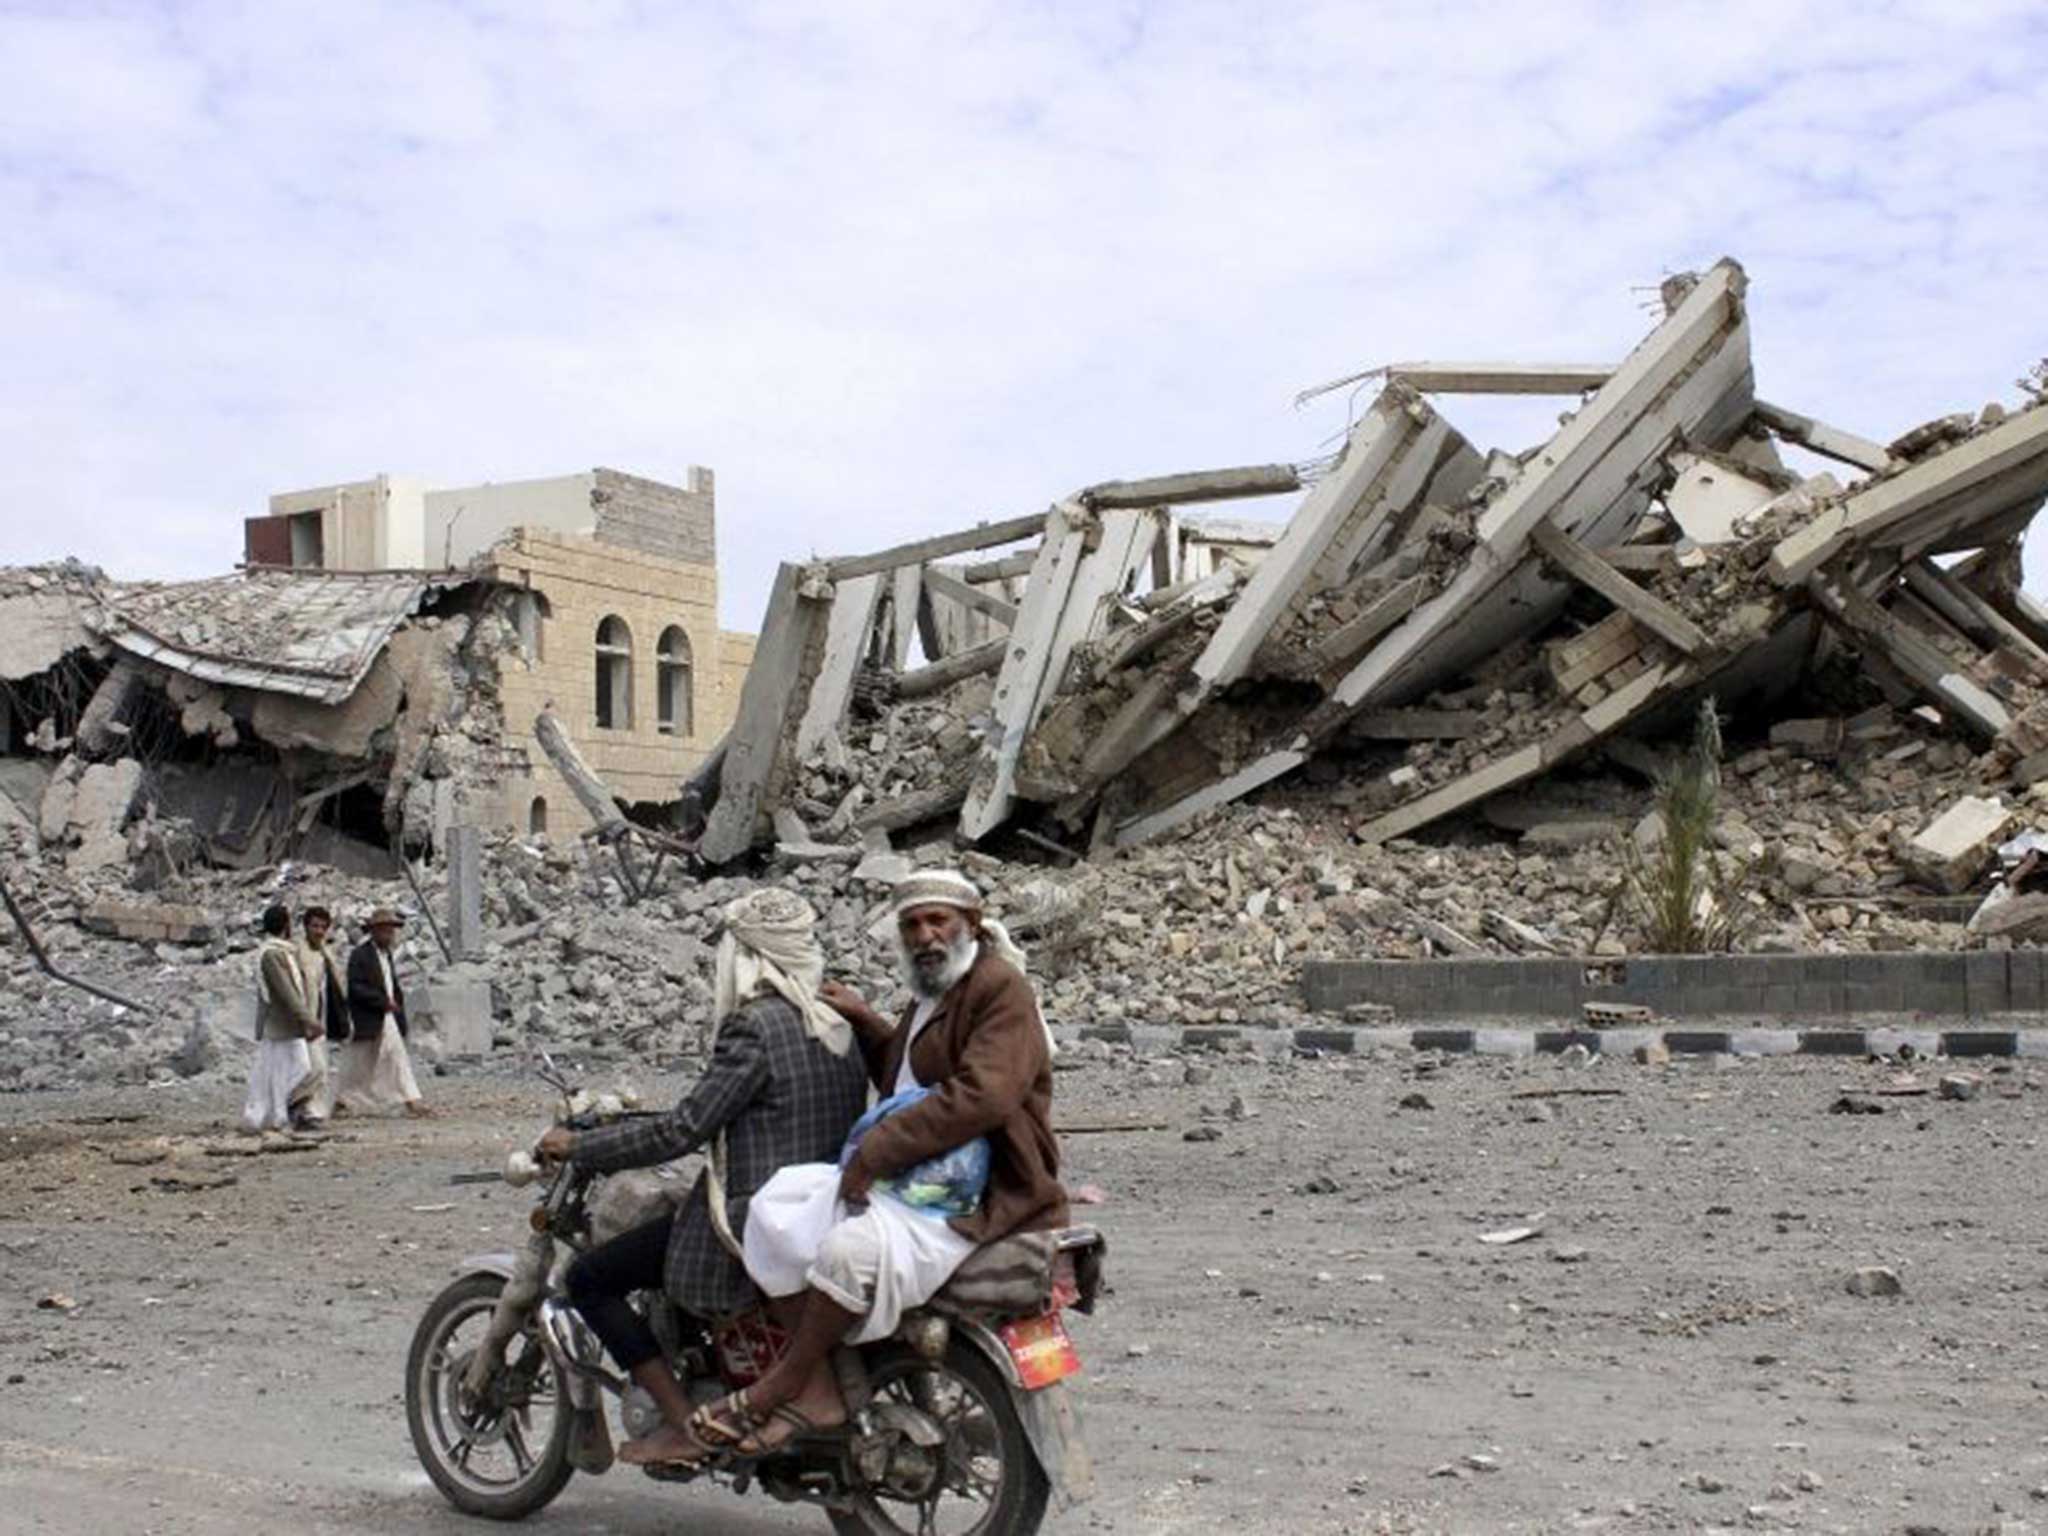 People ride on a motorcycle as they pass by a police headquarters destroyed by a Saudi-led air strike in Yemen's northwestern city of Saada